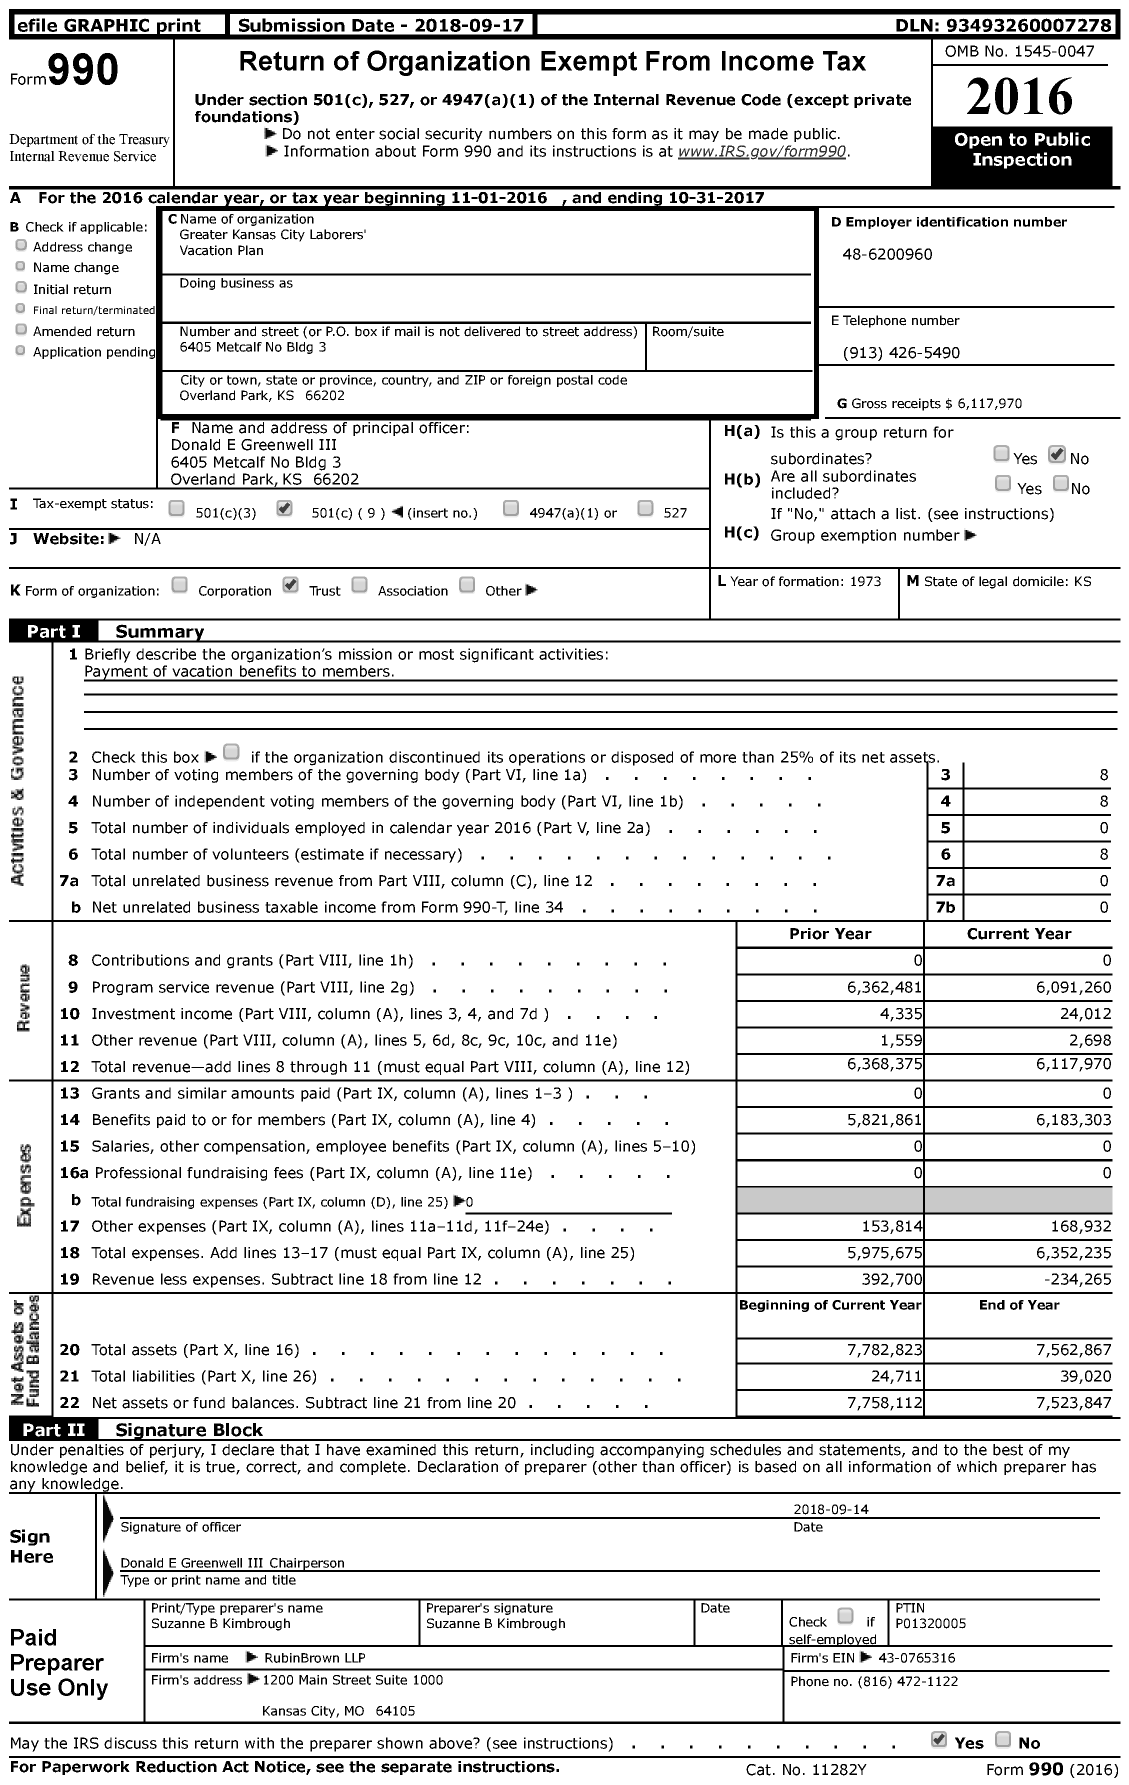 Image of first page of 2016 Form 990 for Greater Kansas City Laborers' Vacation Plan